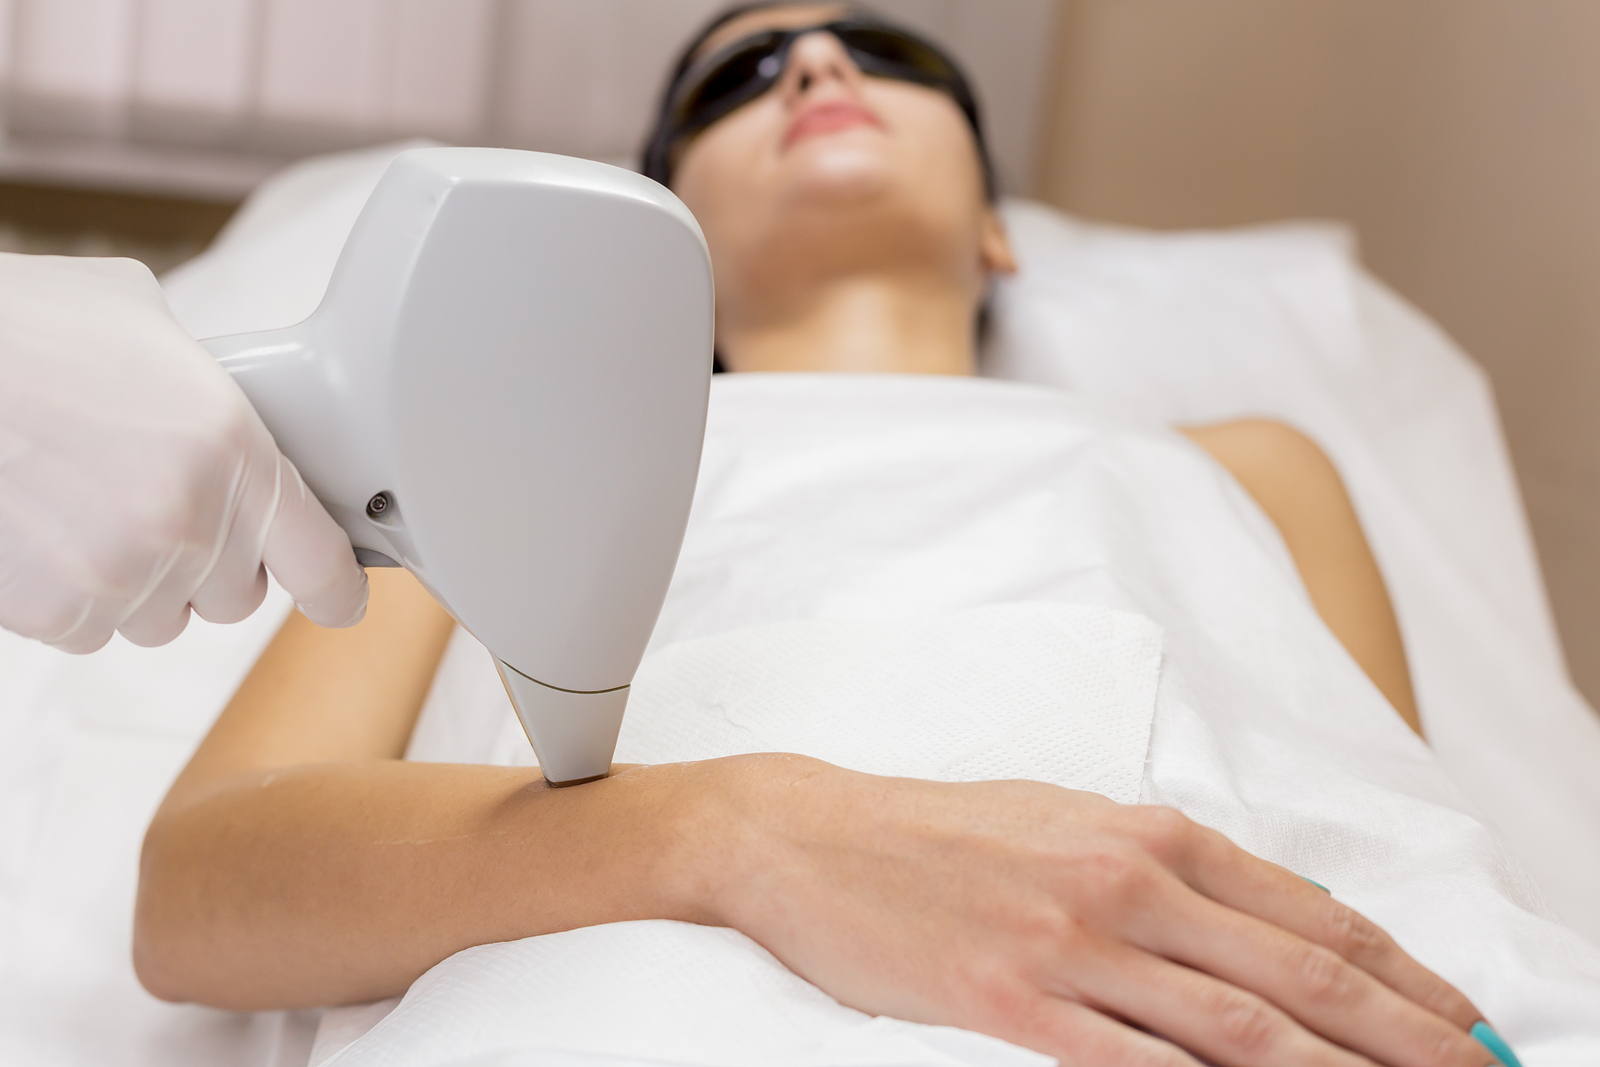 IPL Hair Removal vs Laser Hair Removal, Which Is Better? 